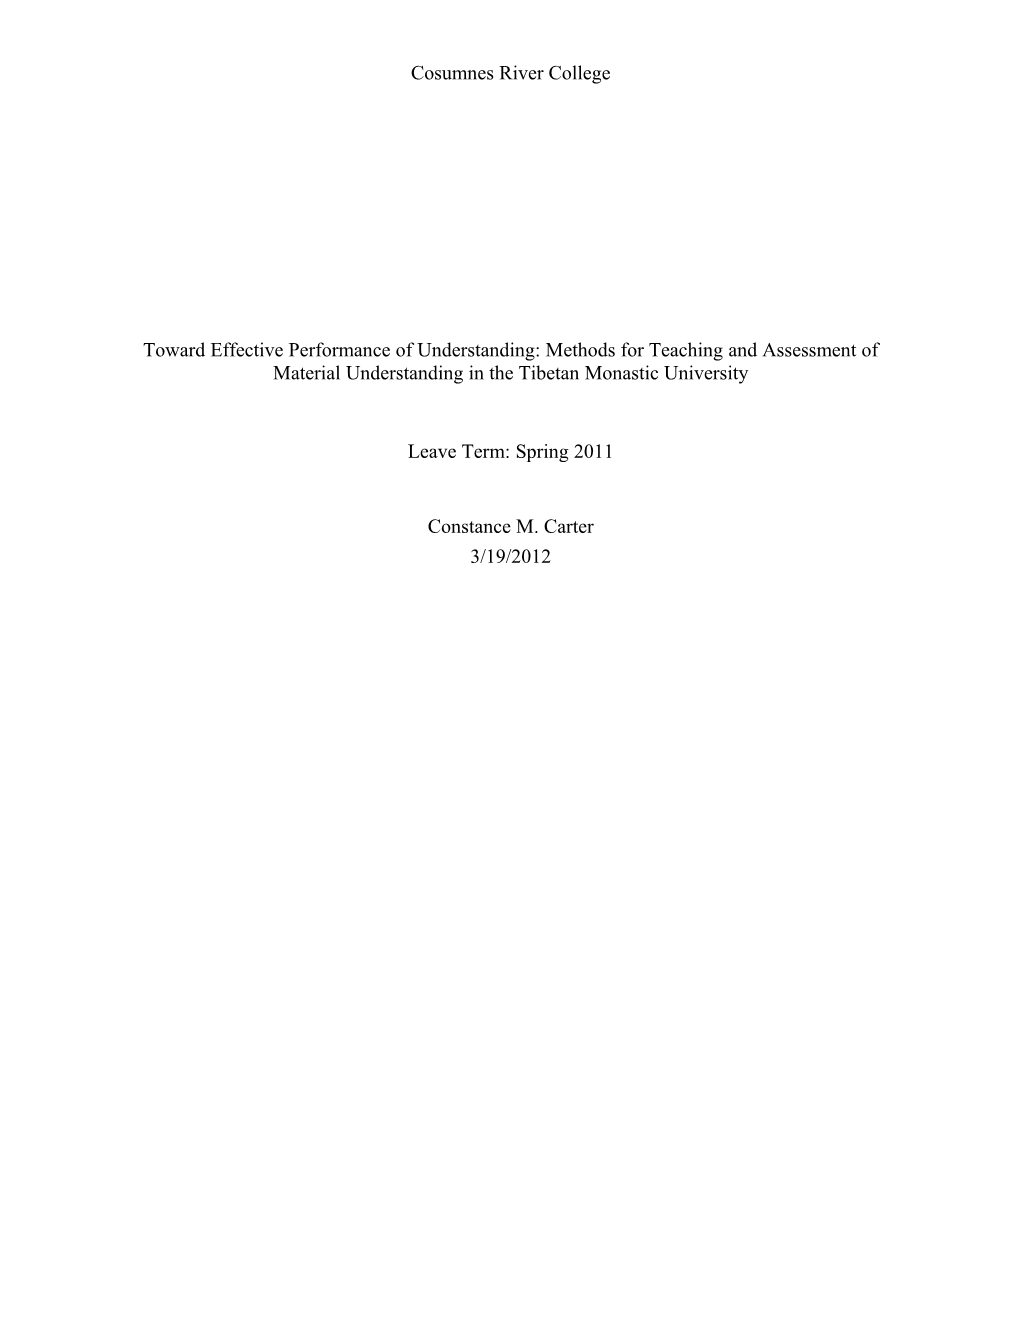 Toward Effective Performance of Understanding: Methods for Teaching and Assessment of Material